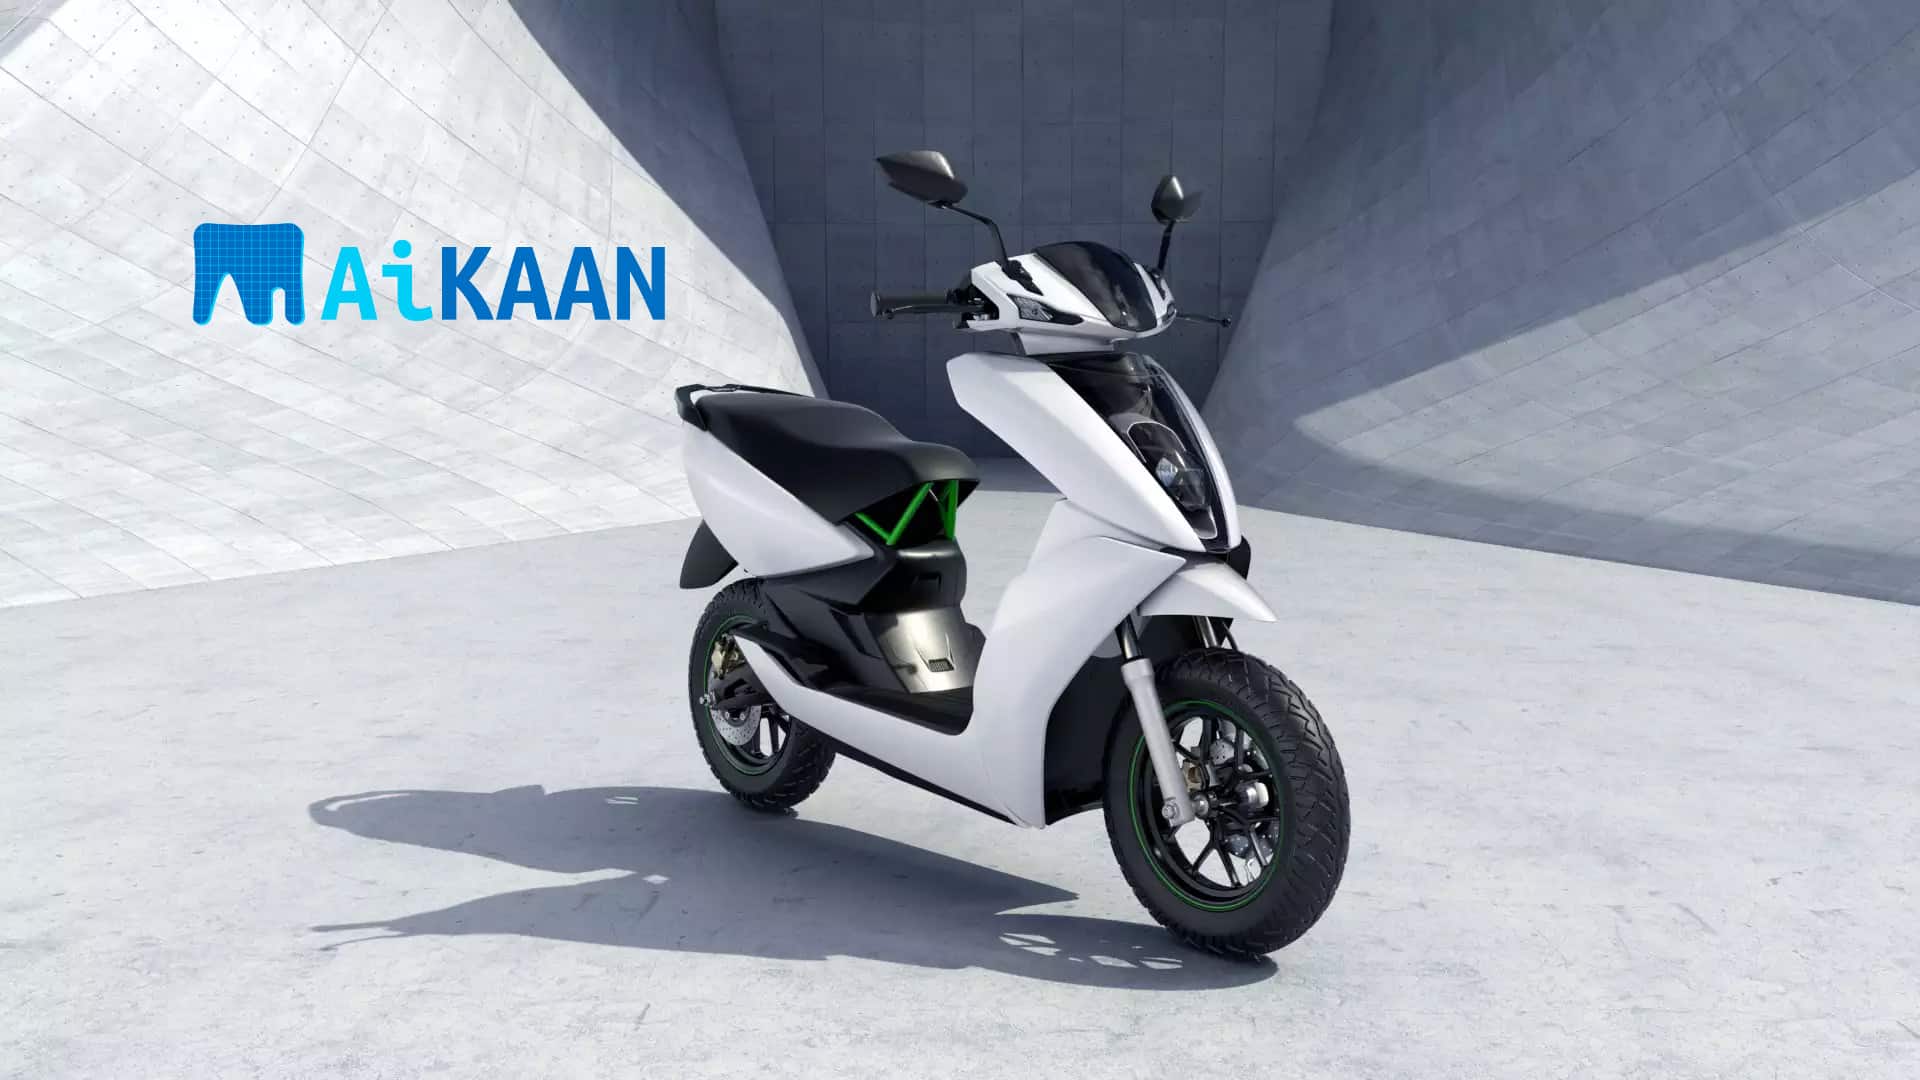 Ather Energy obtains rights to AiKaan's over-the-air platform